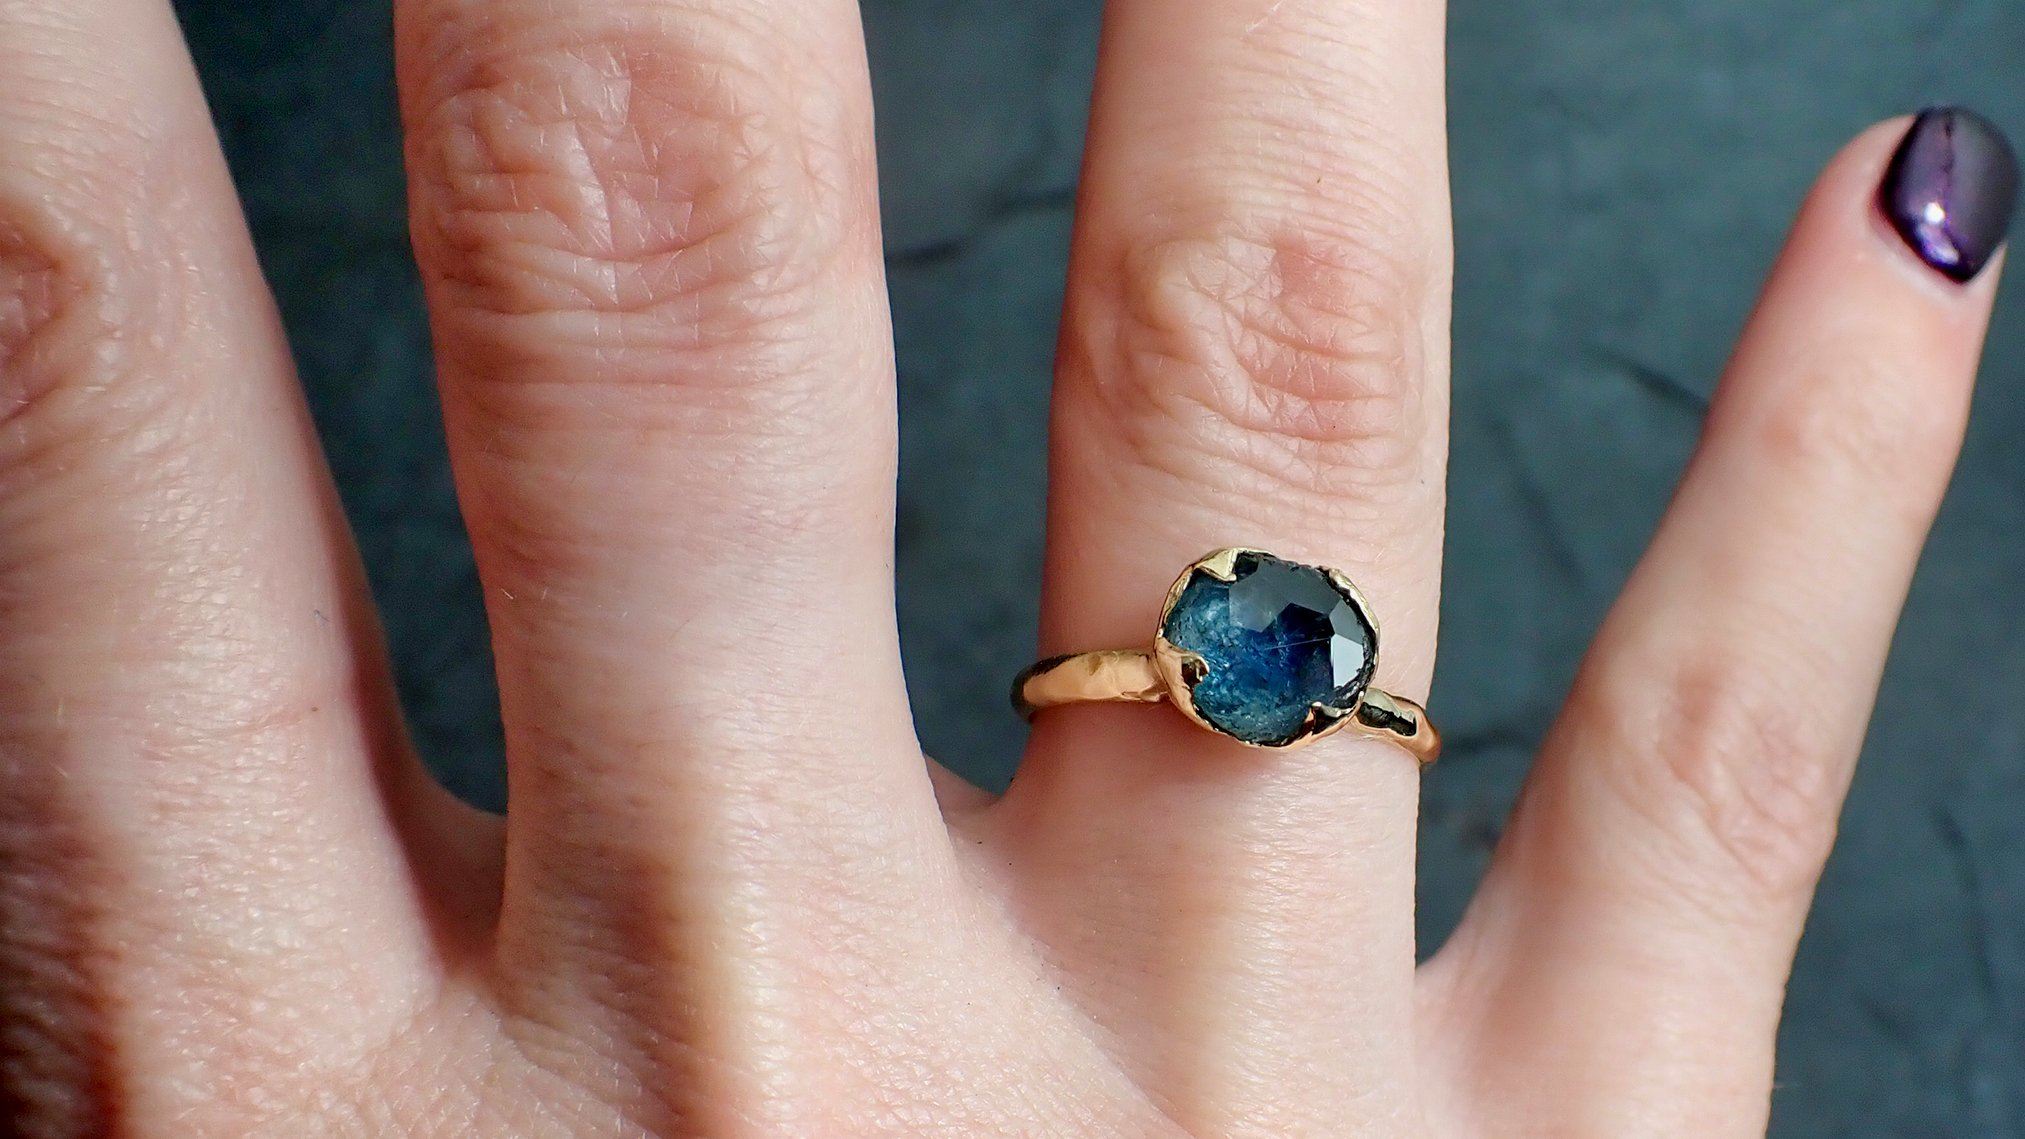 montana sapphire partially faceted solitaire 14k yellow gold engagement ring wedding ring custom one of a kind blue gemstone ring 2187 Alternative Engagement